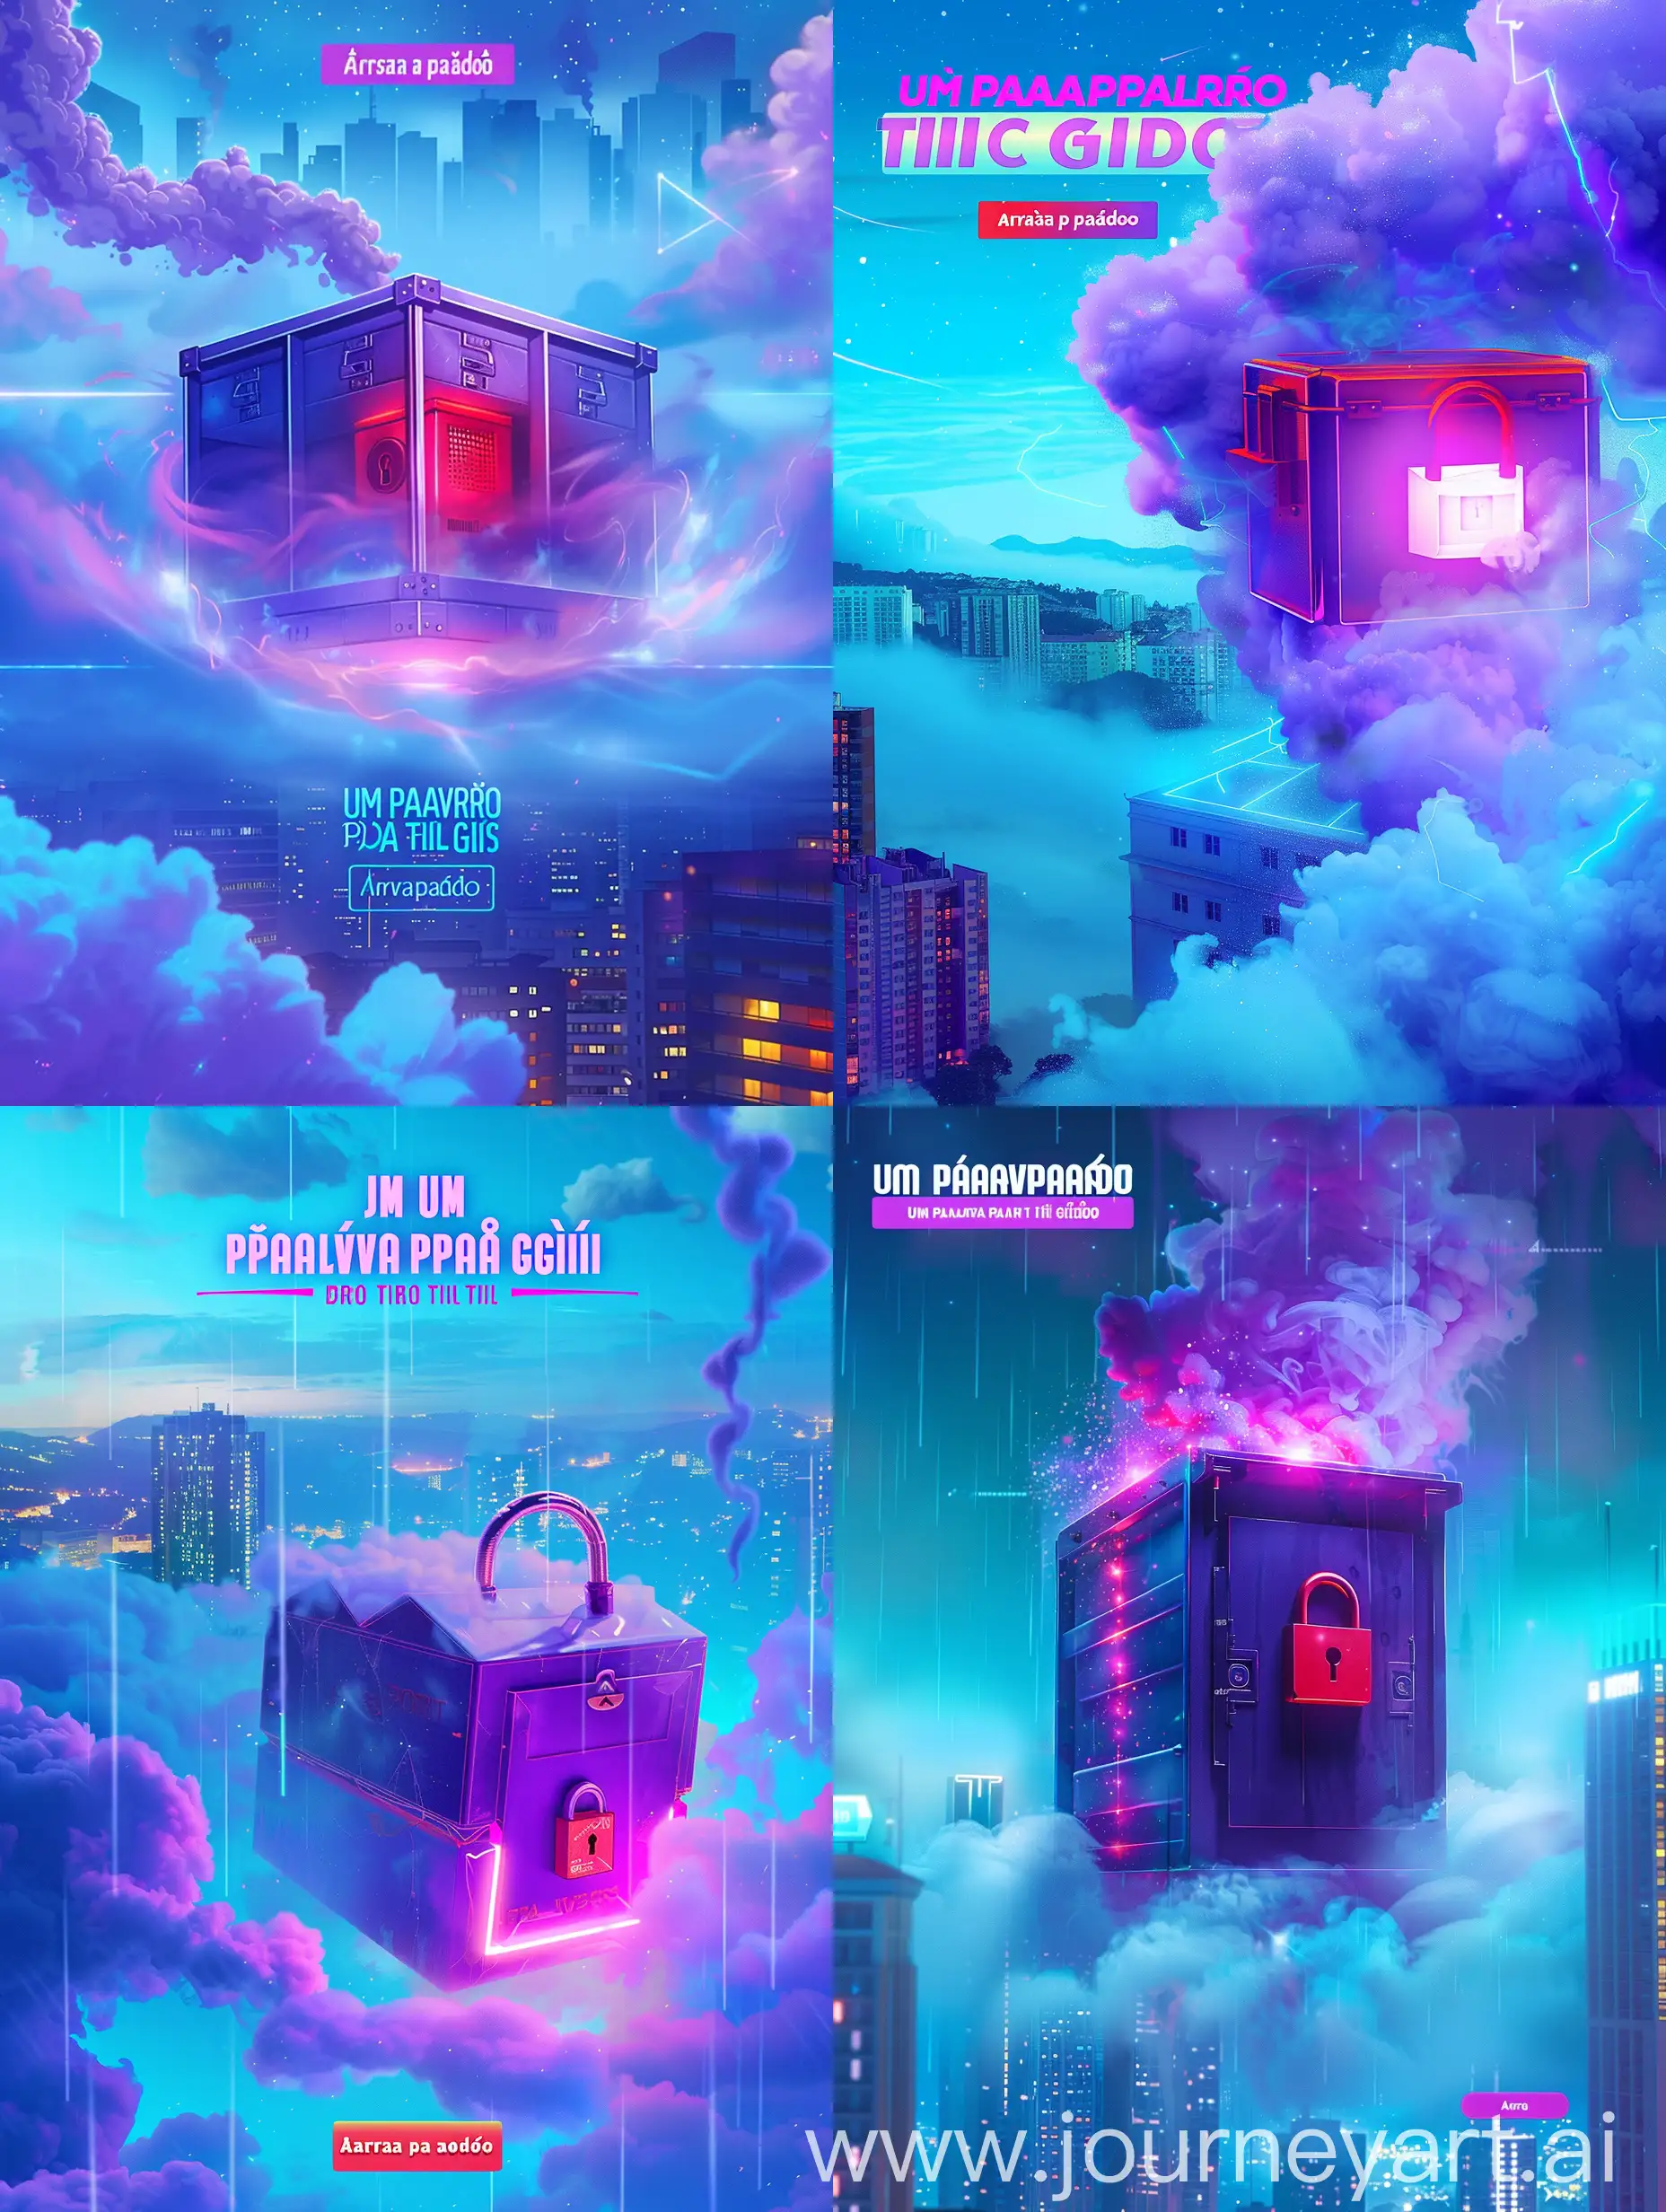 The image is a digital advertisement for a game called "Arrasta para Lado". The background is a vibrant mix of blue and purple hues, with a cityscape visible in the distance. The main focus is a large, purple-lit box with a red lock, surrounded by a cloud of purple smoke. The text "UM PALAVRRO PARA TIL GIRDS" is prominently displayed, indicating the game's title. The advertisement also includes a "Arrasta para Lado" button, suggesting the game is.